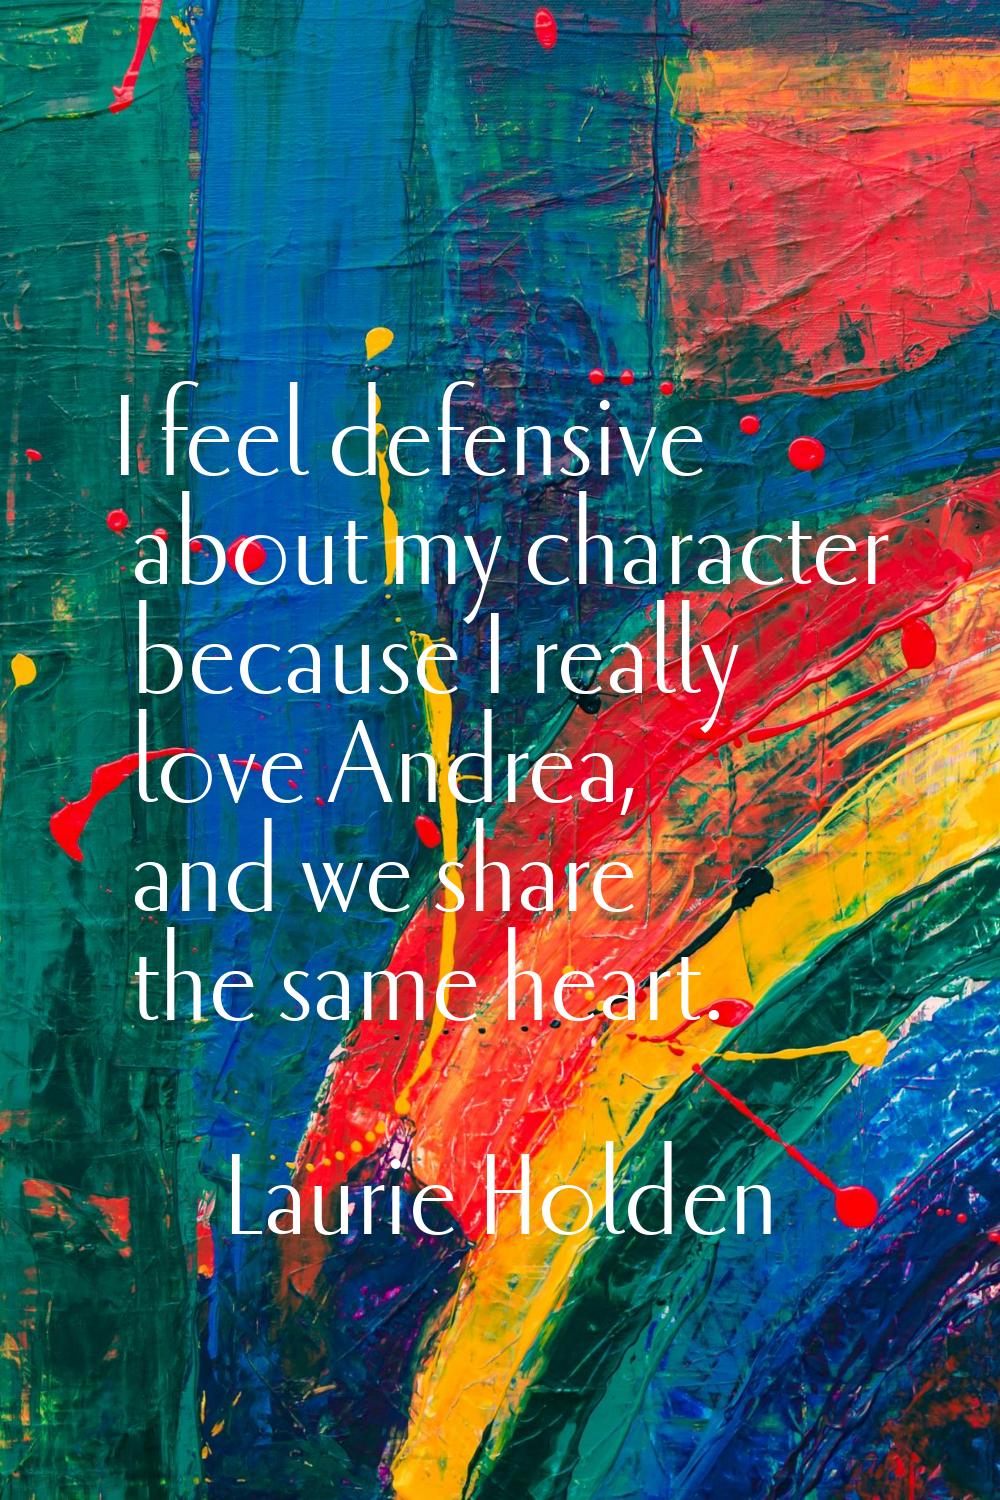 I feel defensive about my character because I really love Andrea, and we share the same heart.